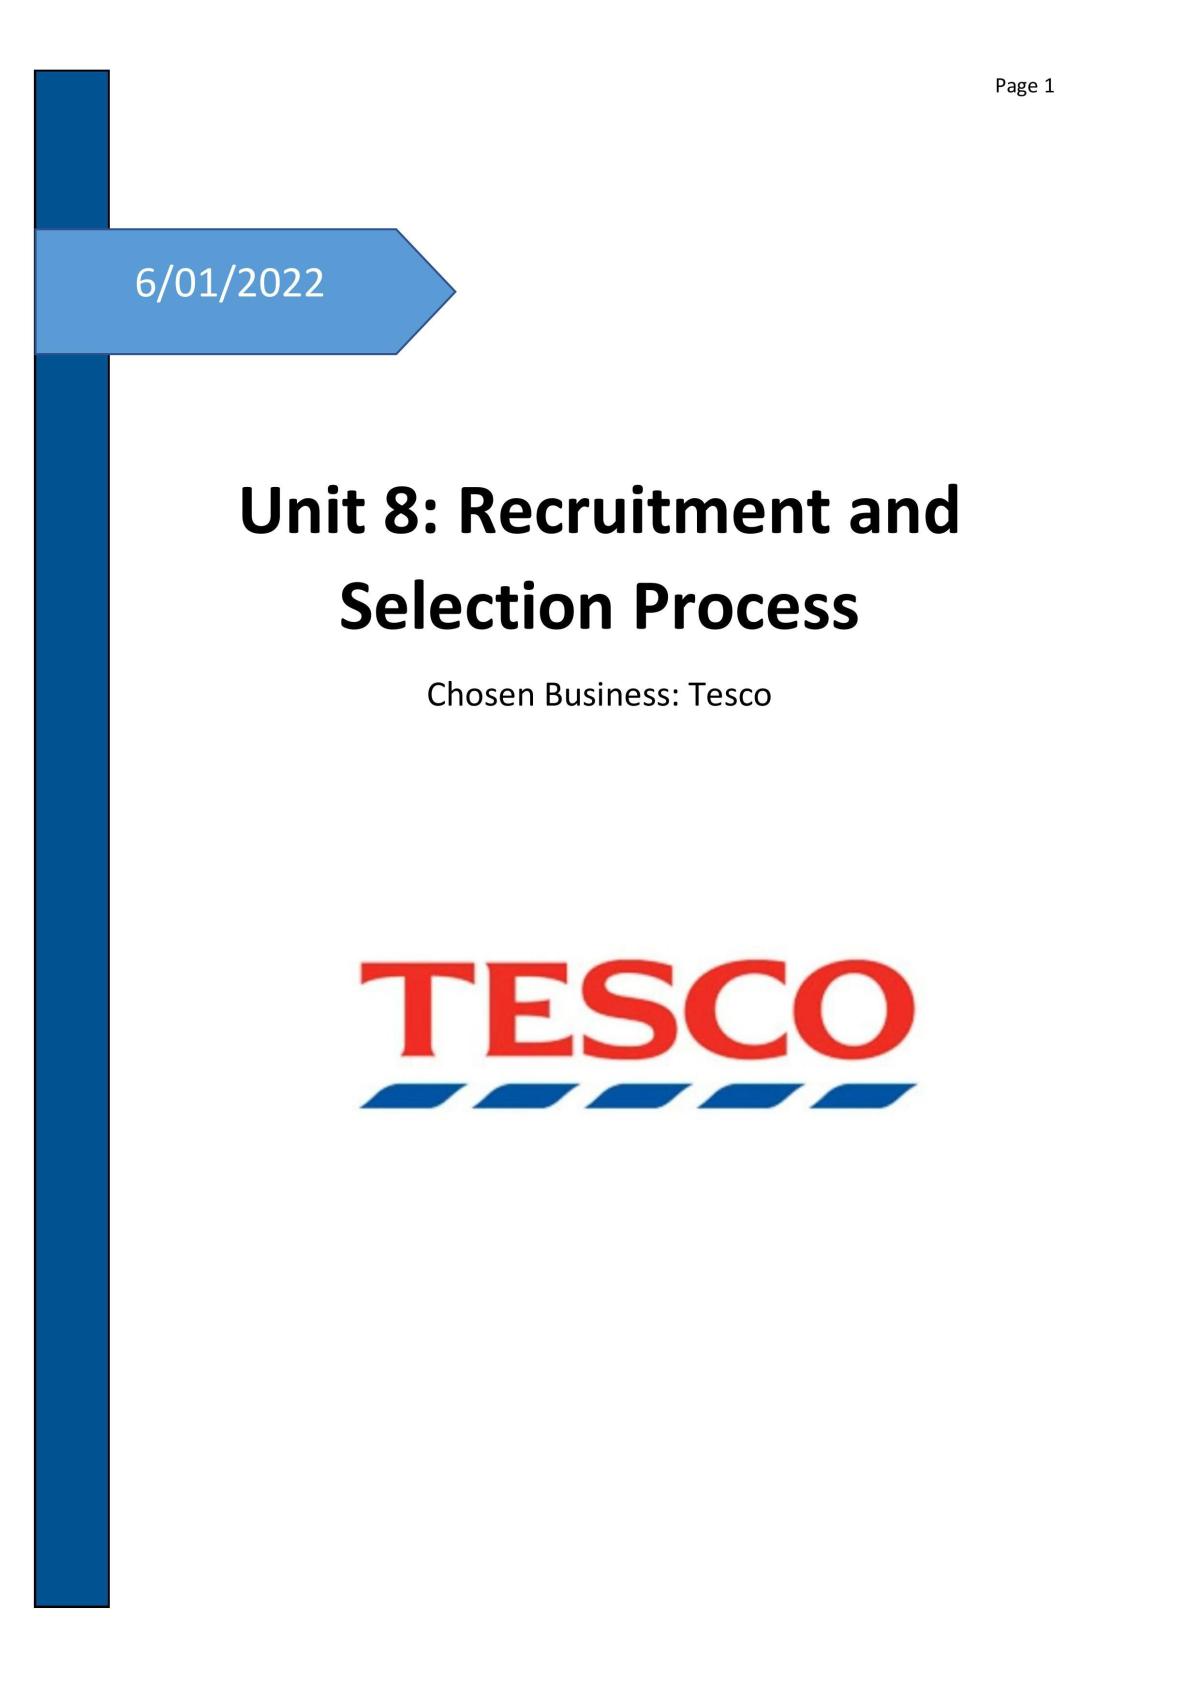 Recruitment Coursework - Page 1